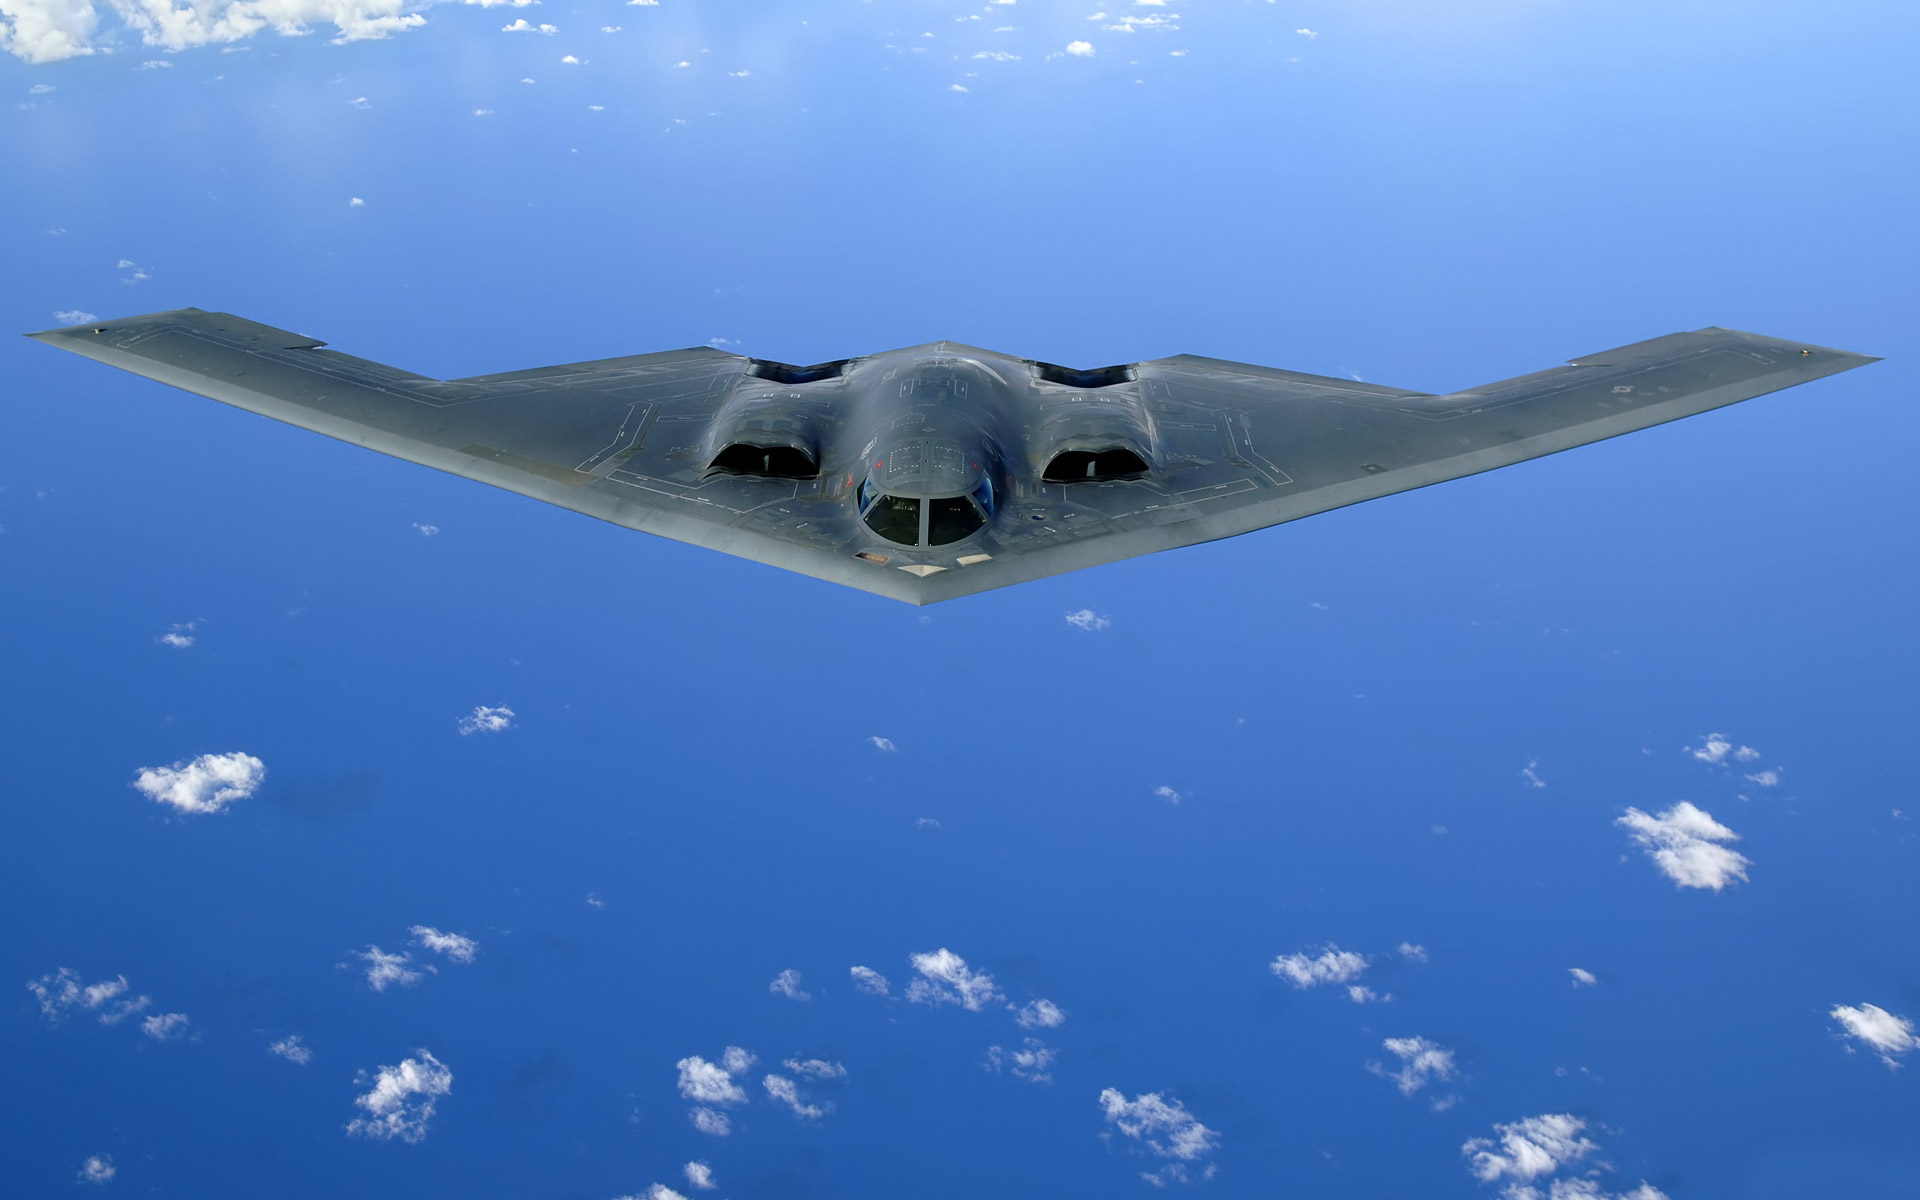 Stealth Military Jet 10085 Hd Wallpapers in Aircraft   Imagescicom